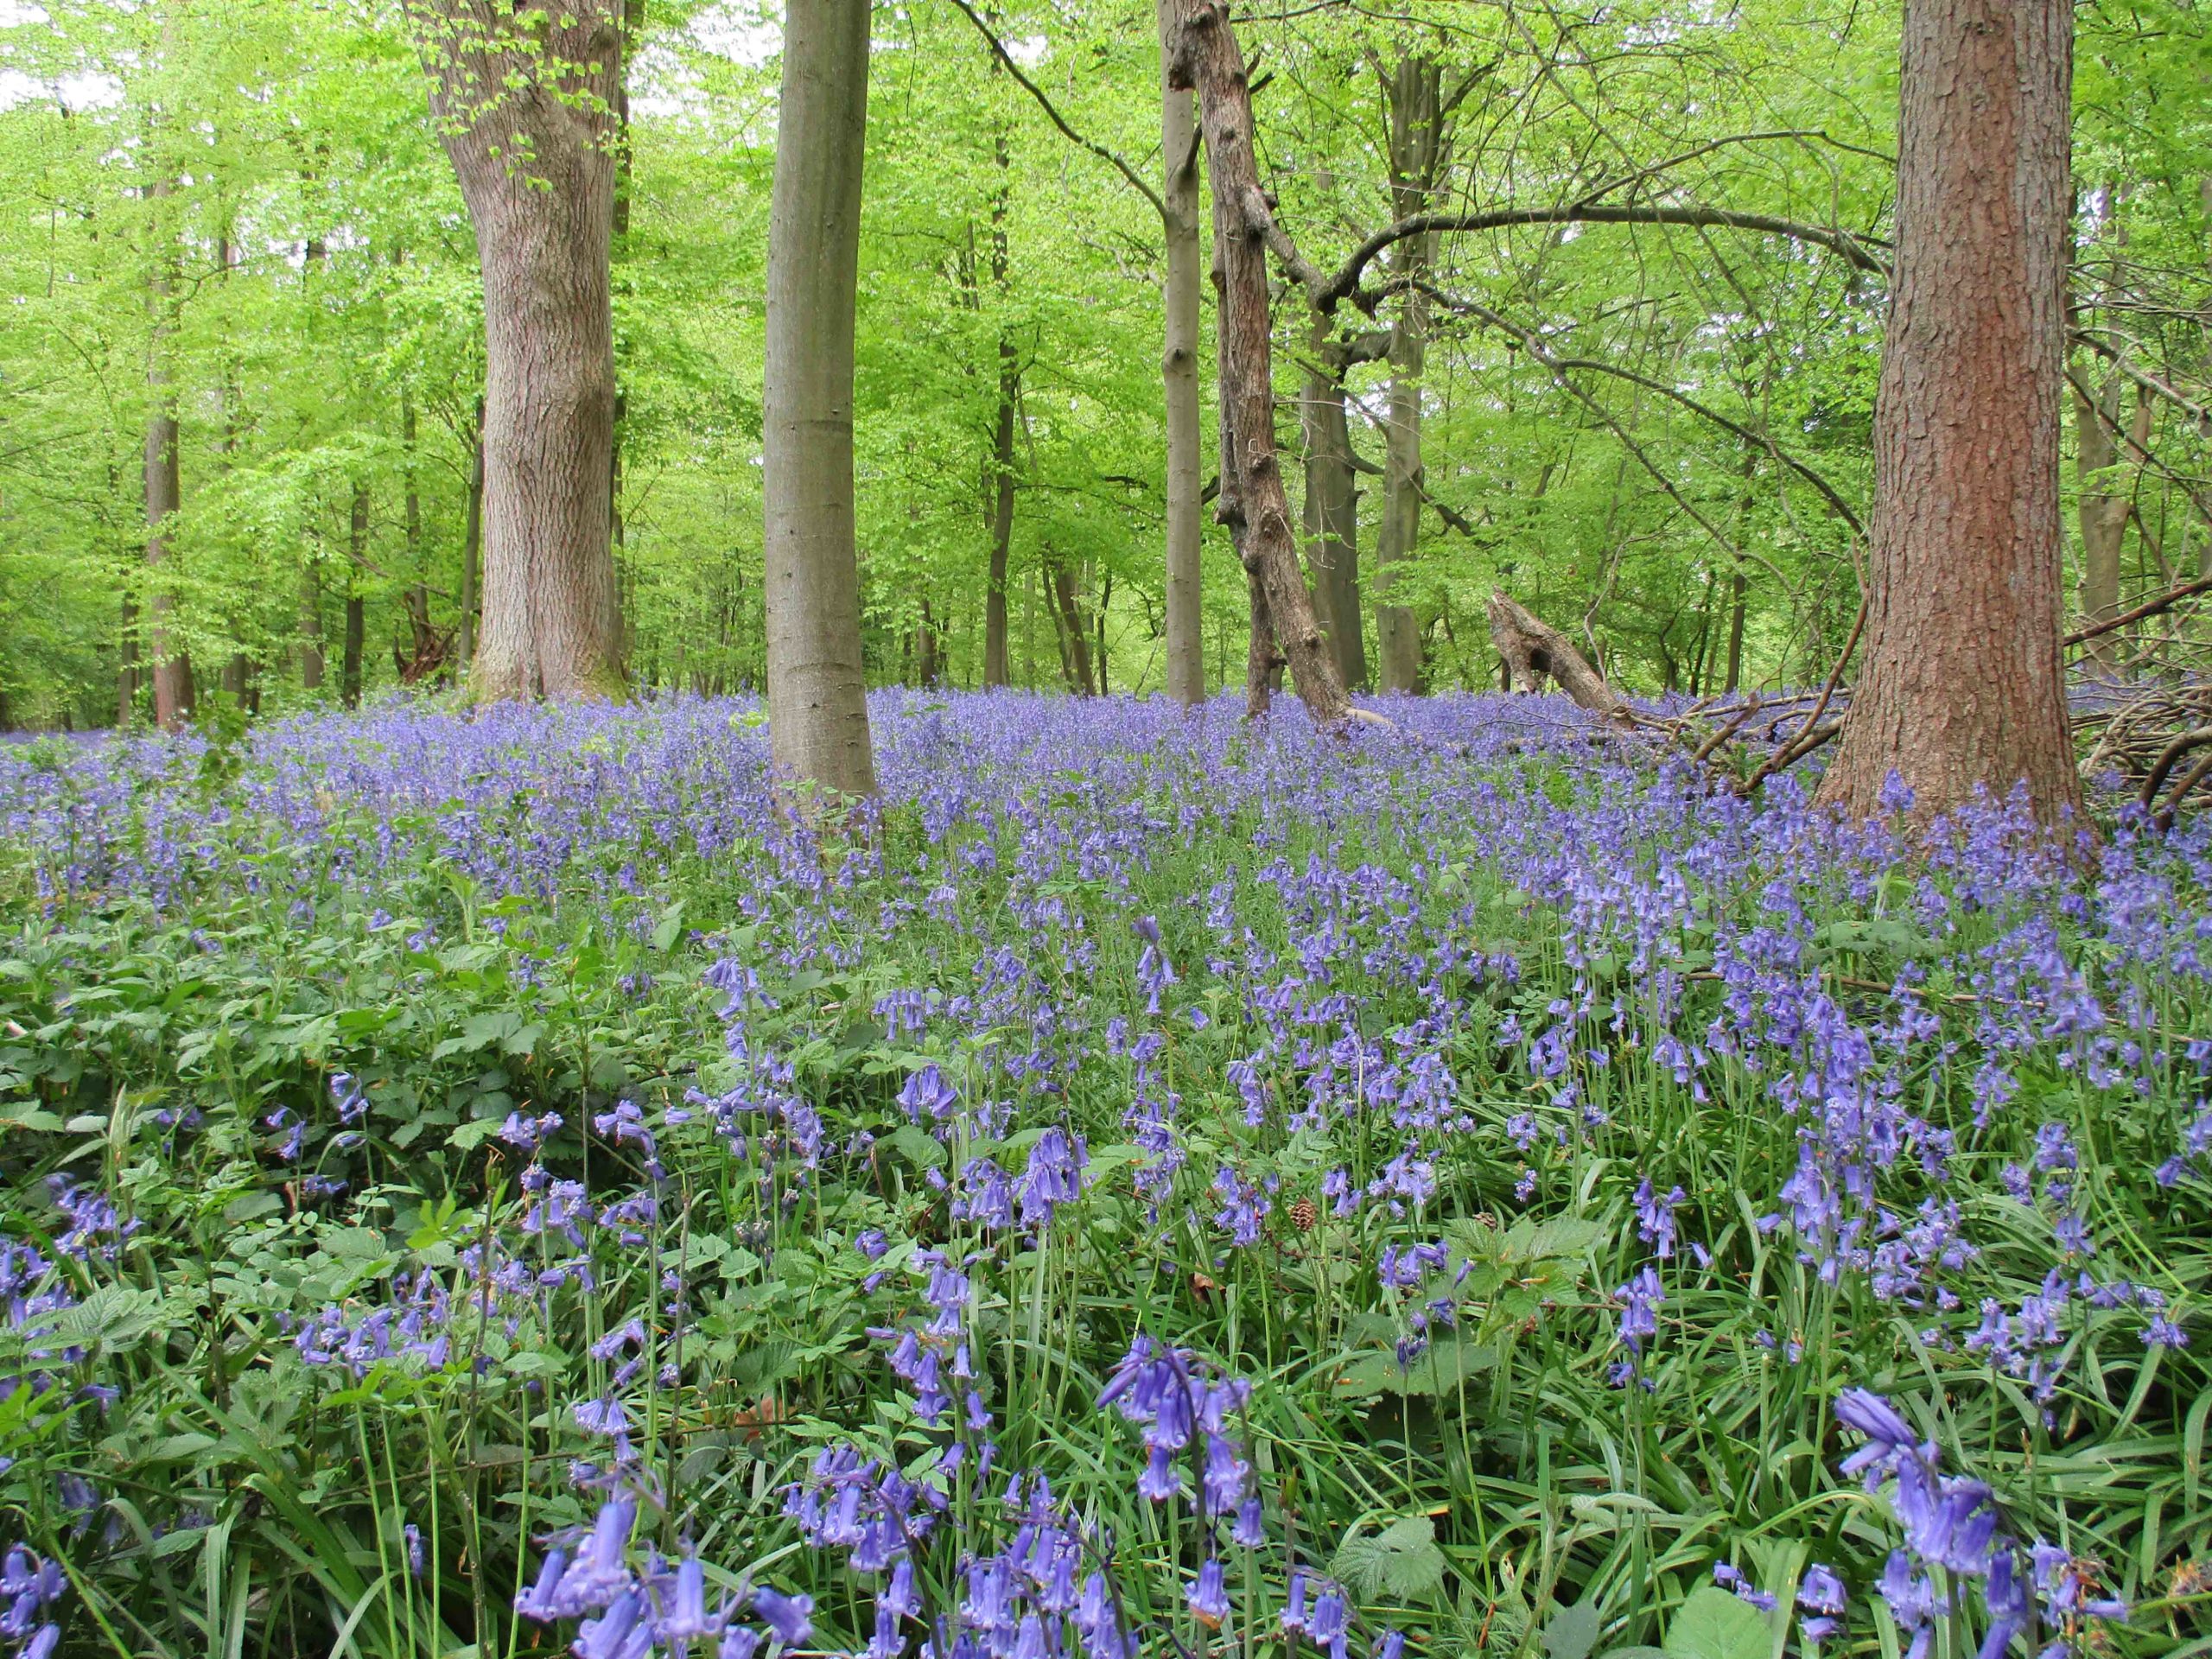 ancient woodland with bluebells in bloom